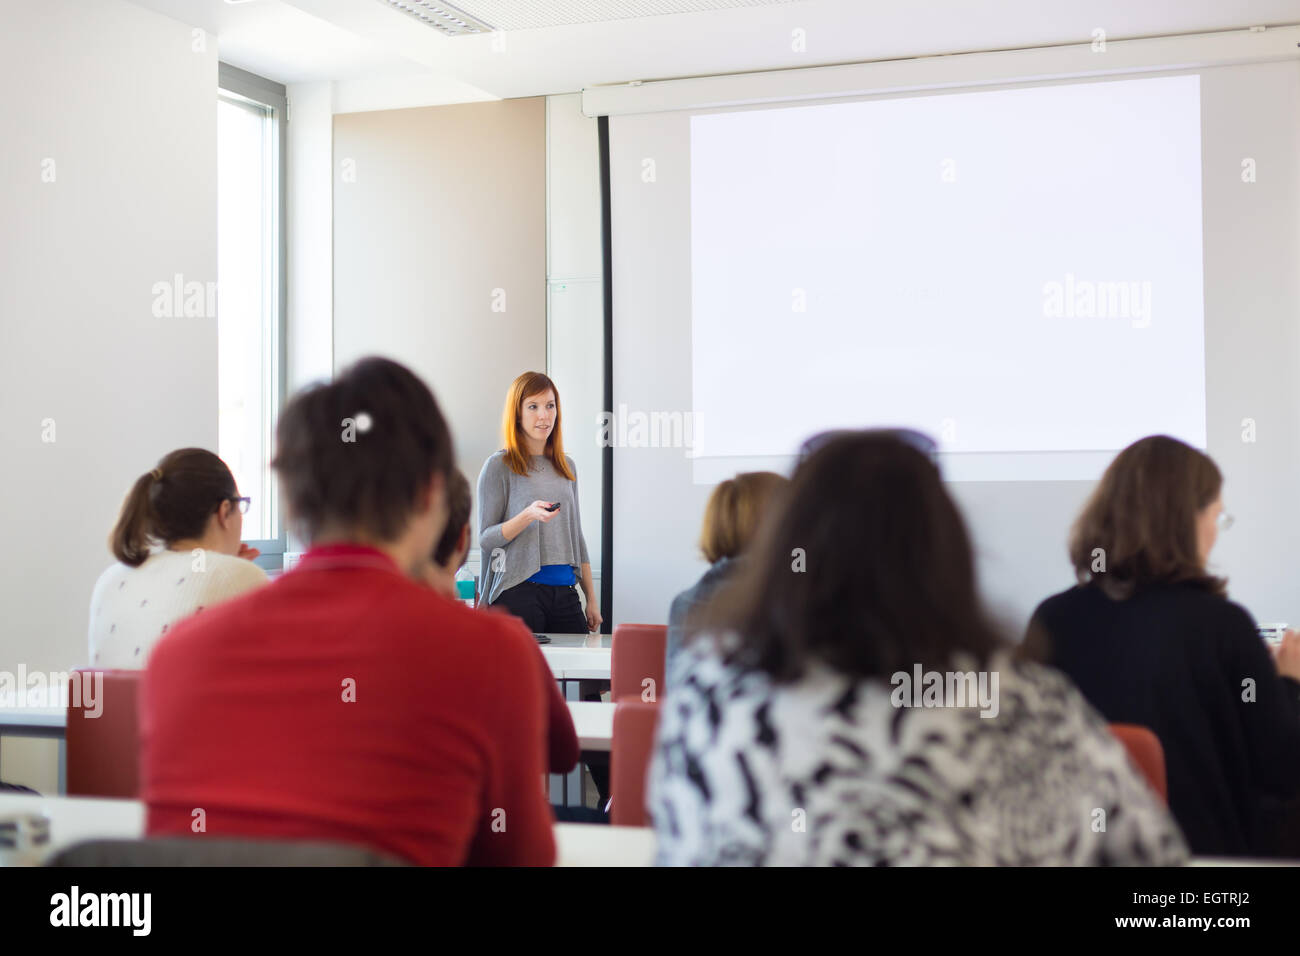 Lecture at university. Stock Photo